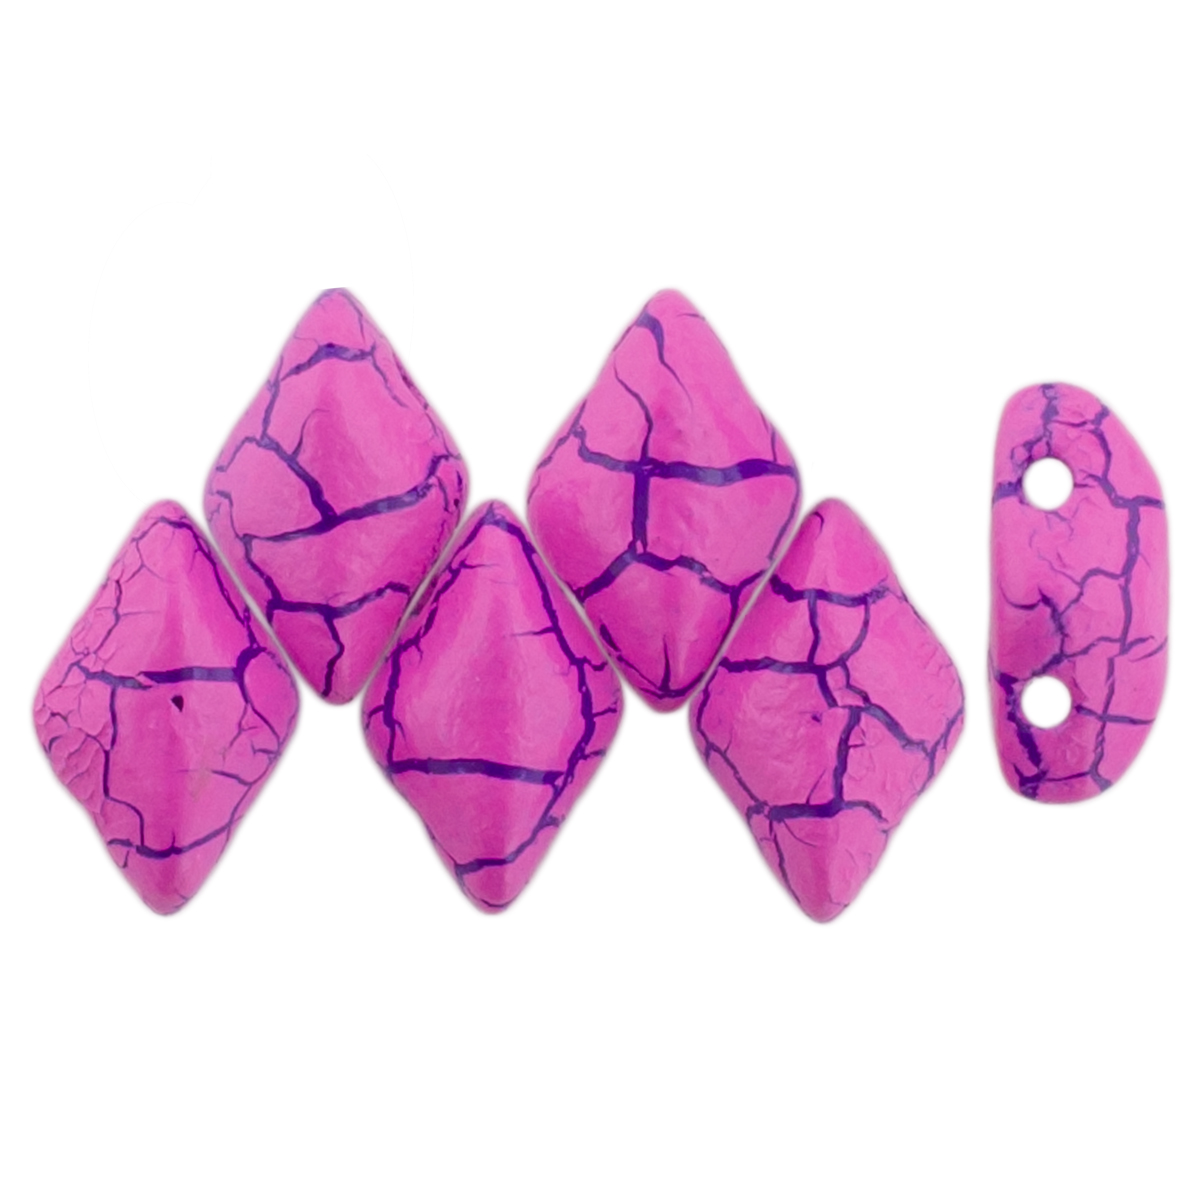 GEMDUO 8 x 5mm (loose) : Colortrends: Ionic Pink/Blue